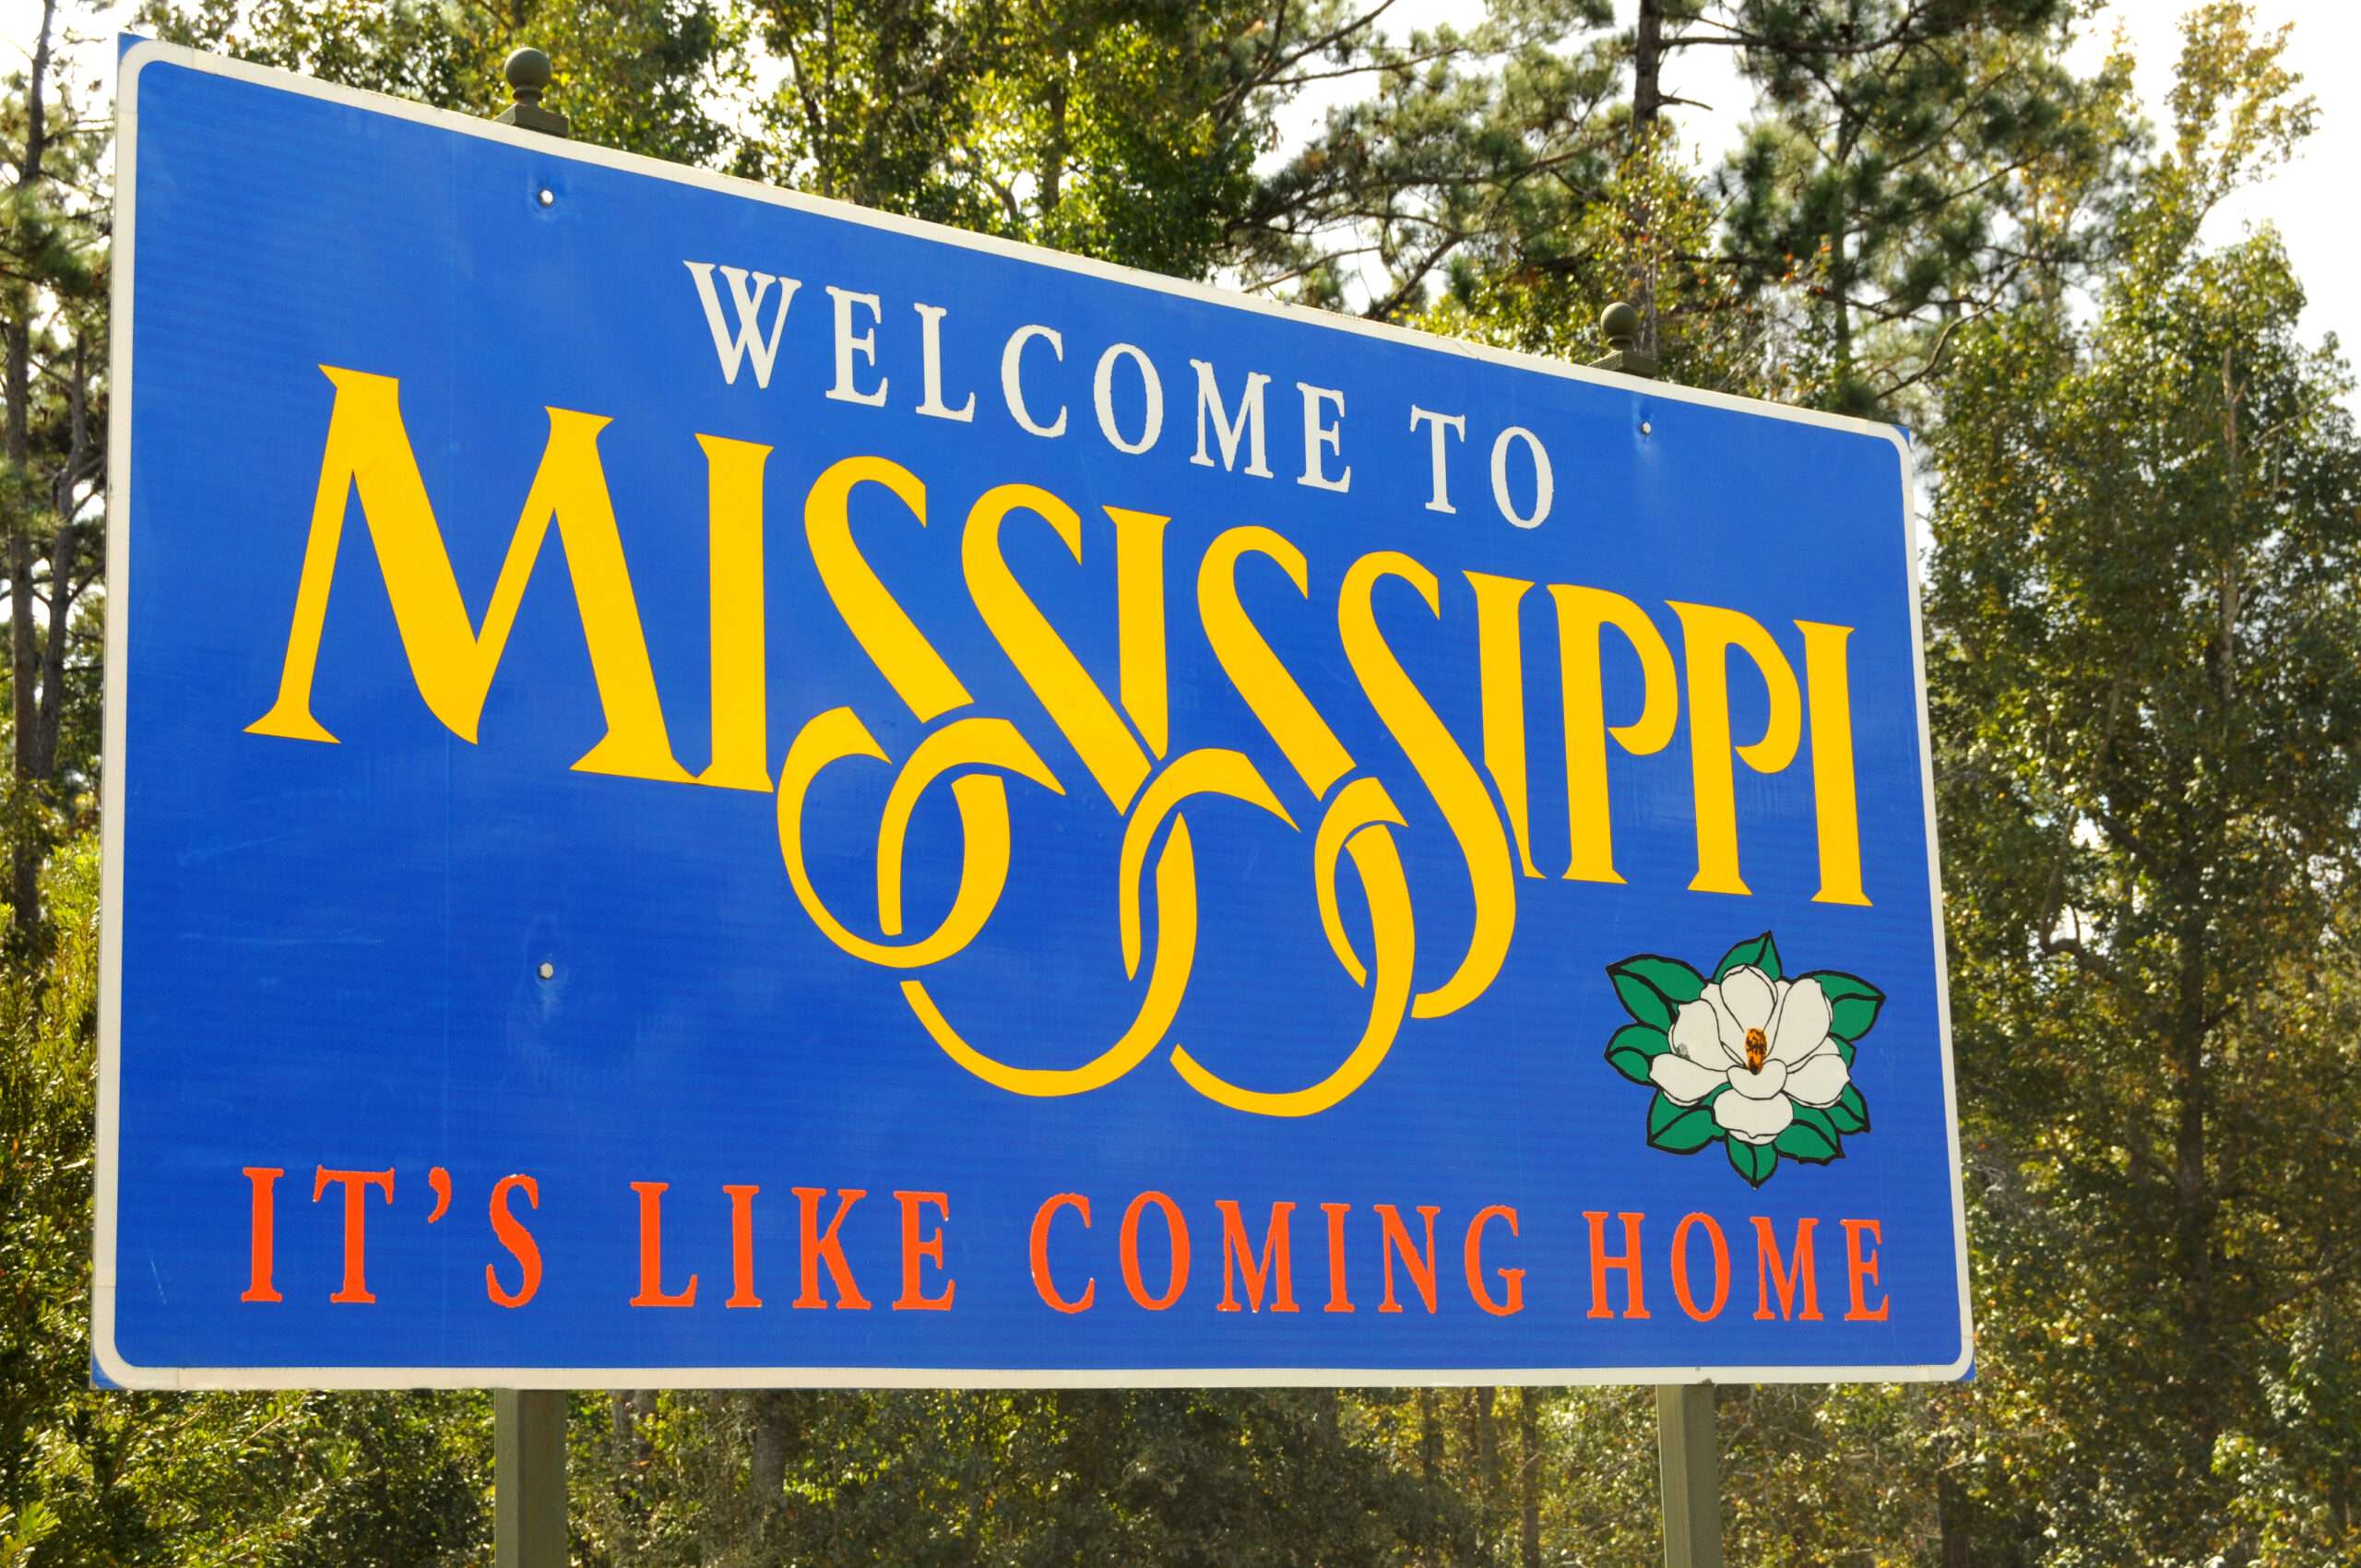 Mississippi Tethers Real Estate Agents to Outdated Rule